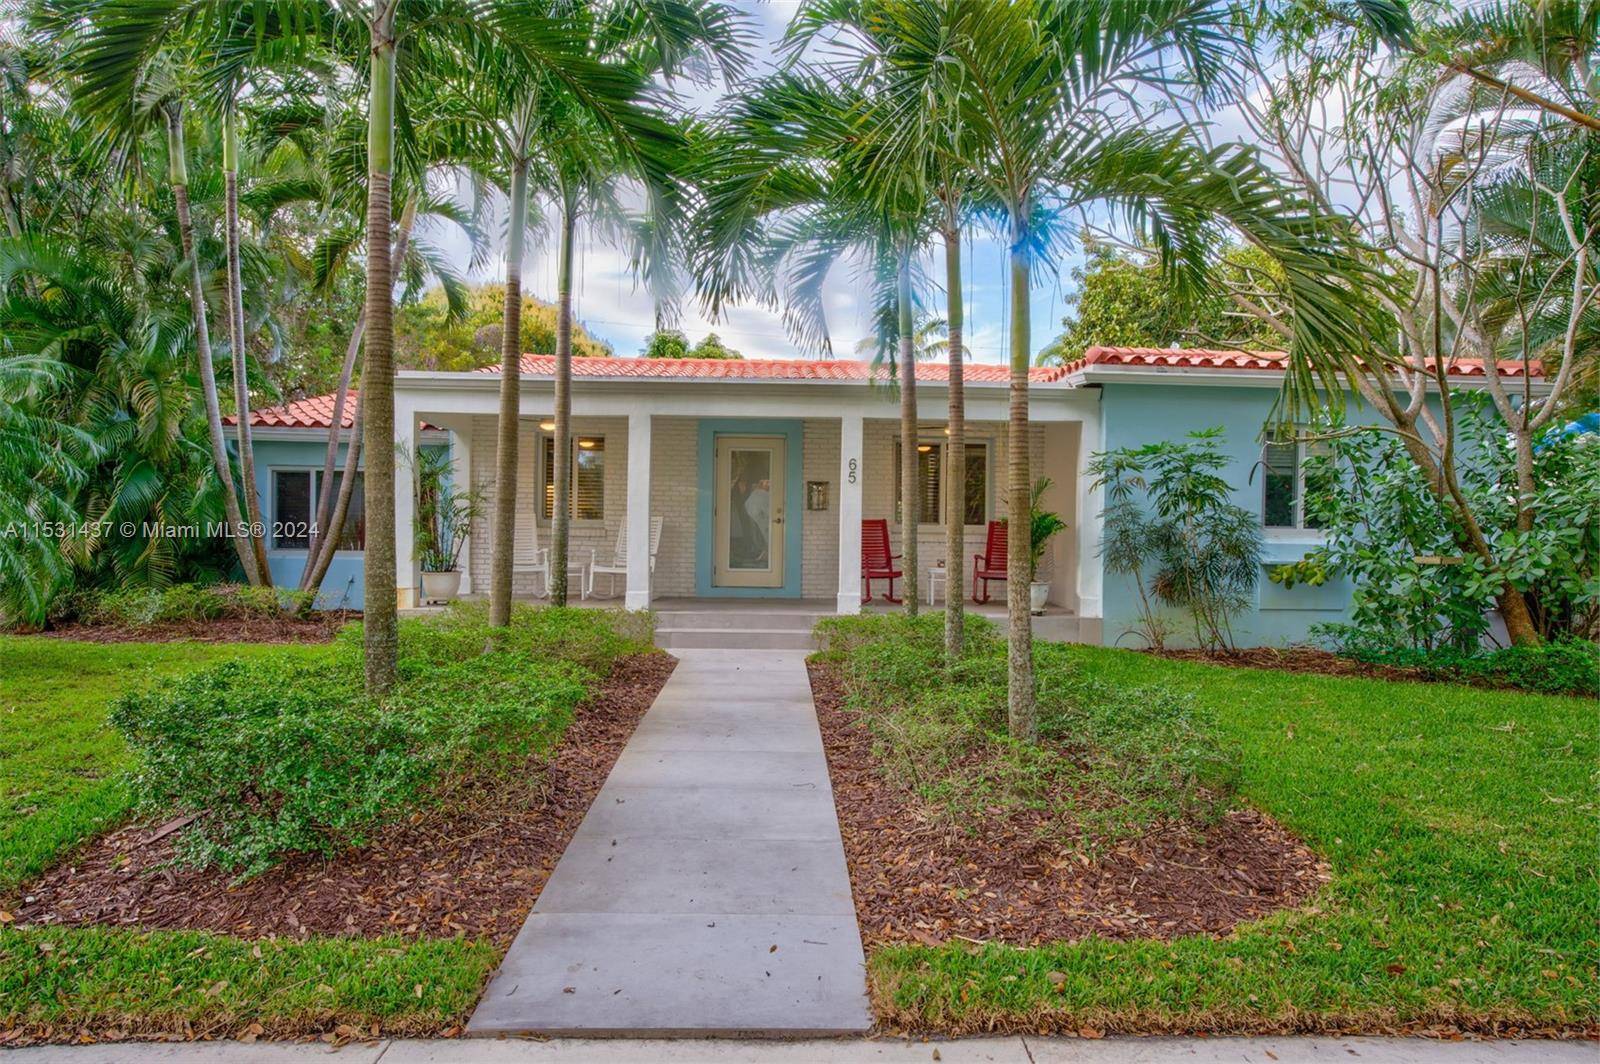 Prime opportunity to own a Miami Shores home with old world charm updated classic lines.